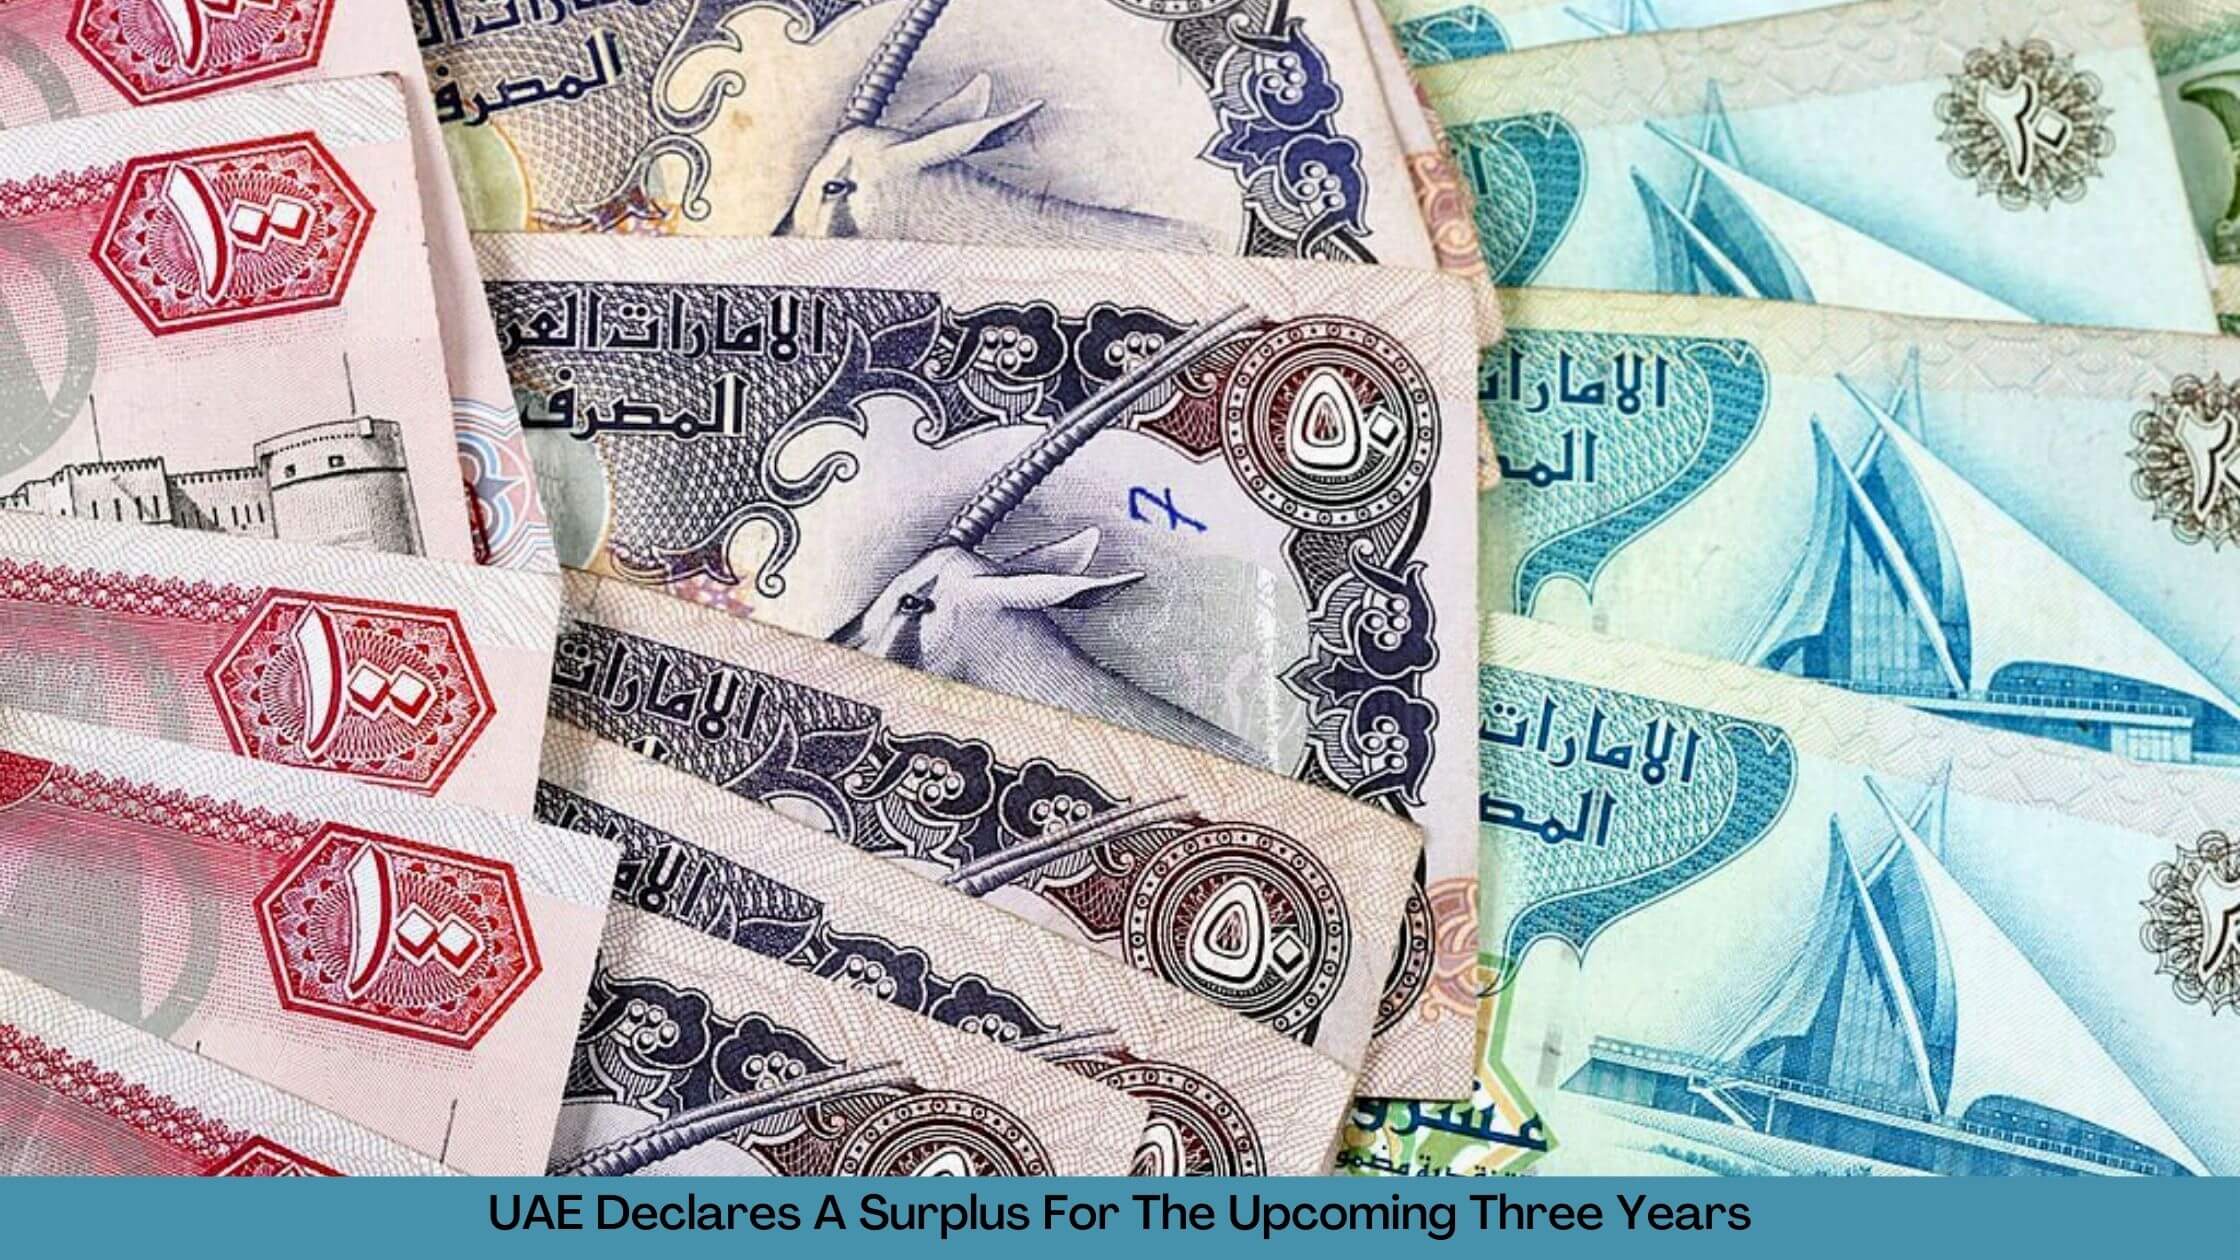 The United Arab Emirates has announced that it would have a budget surplus for the next 3 years